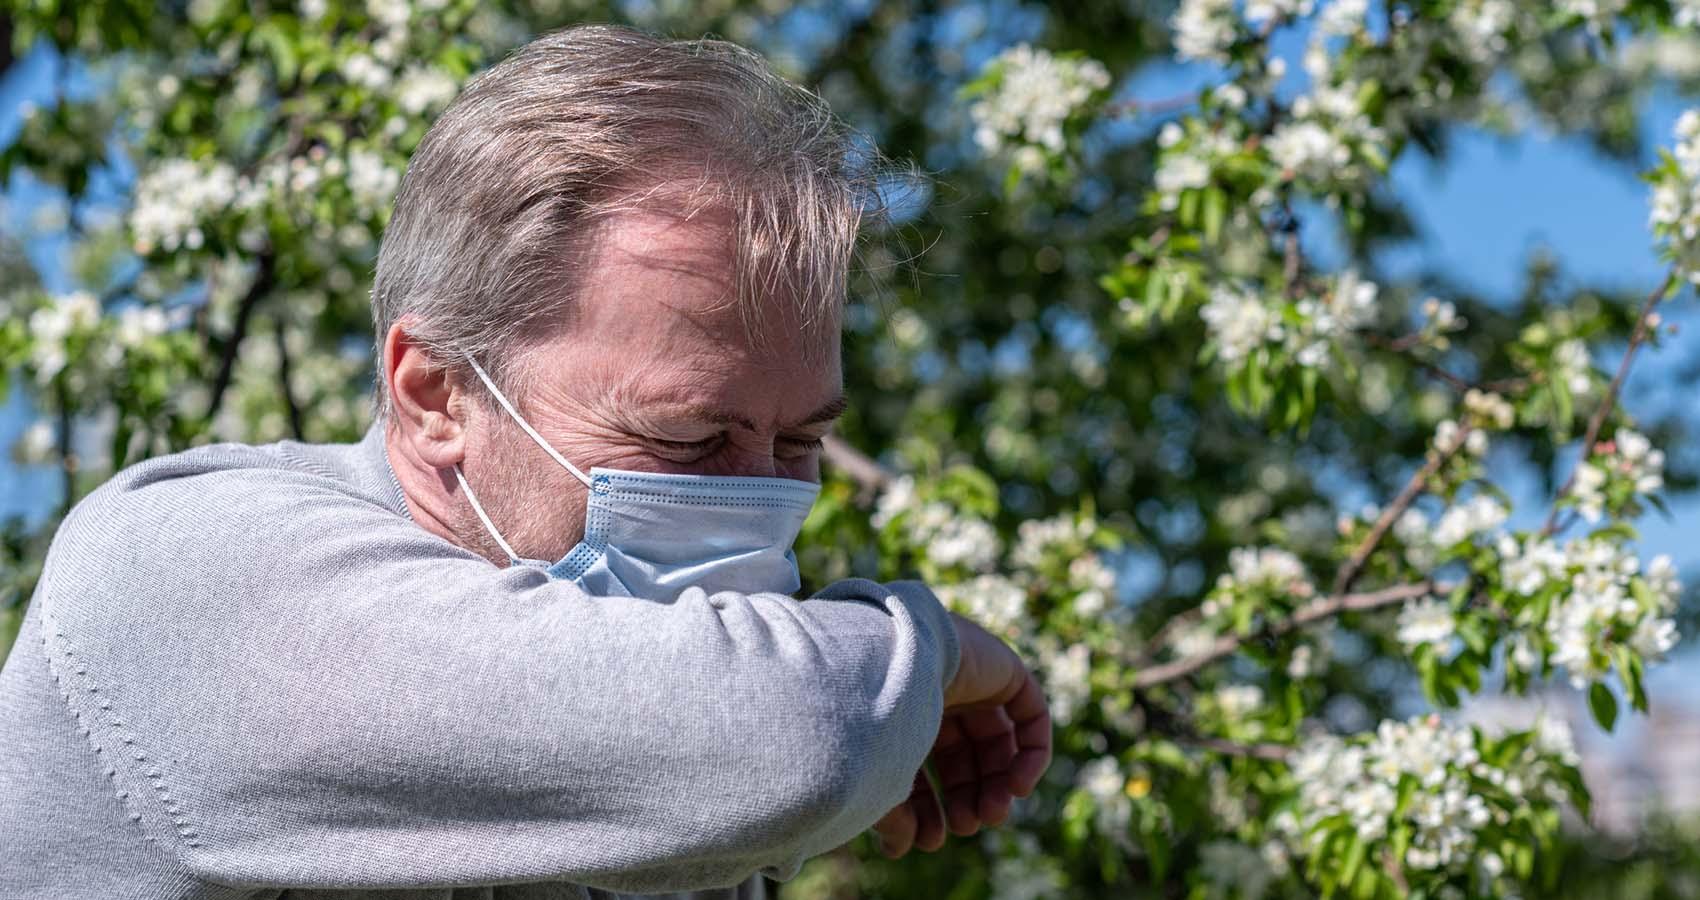 stock photo of man in mask sneezing outdoors